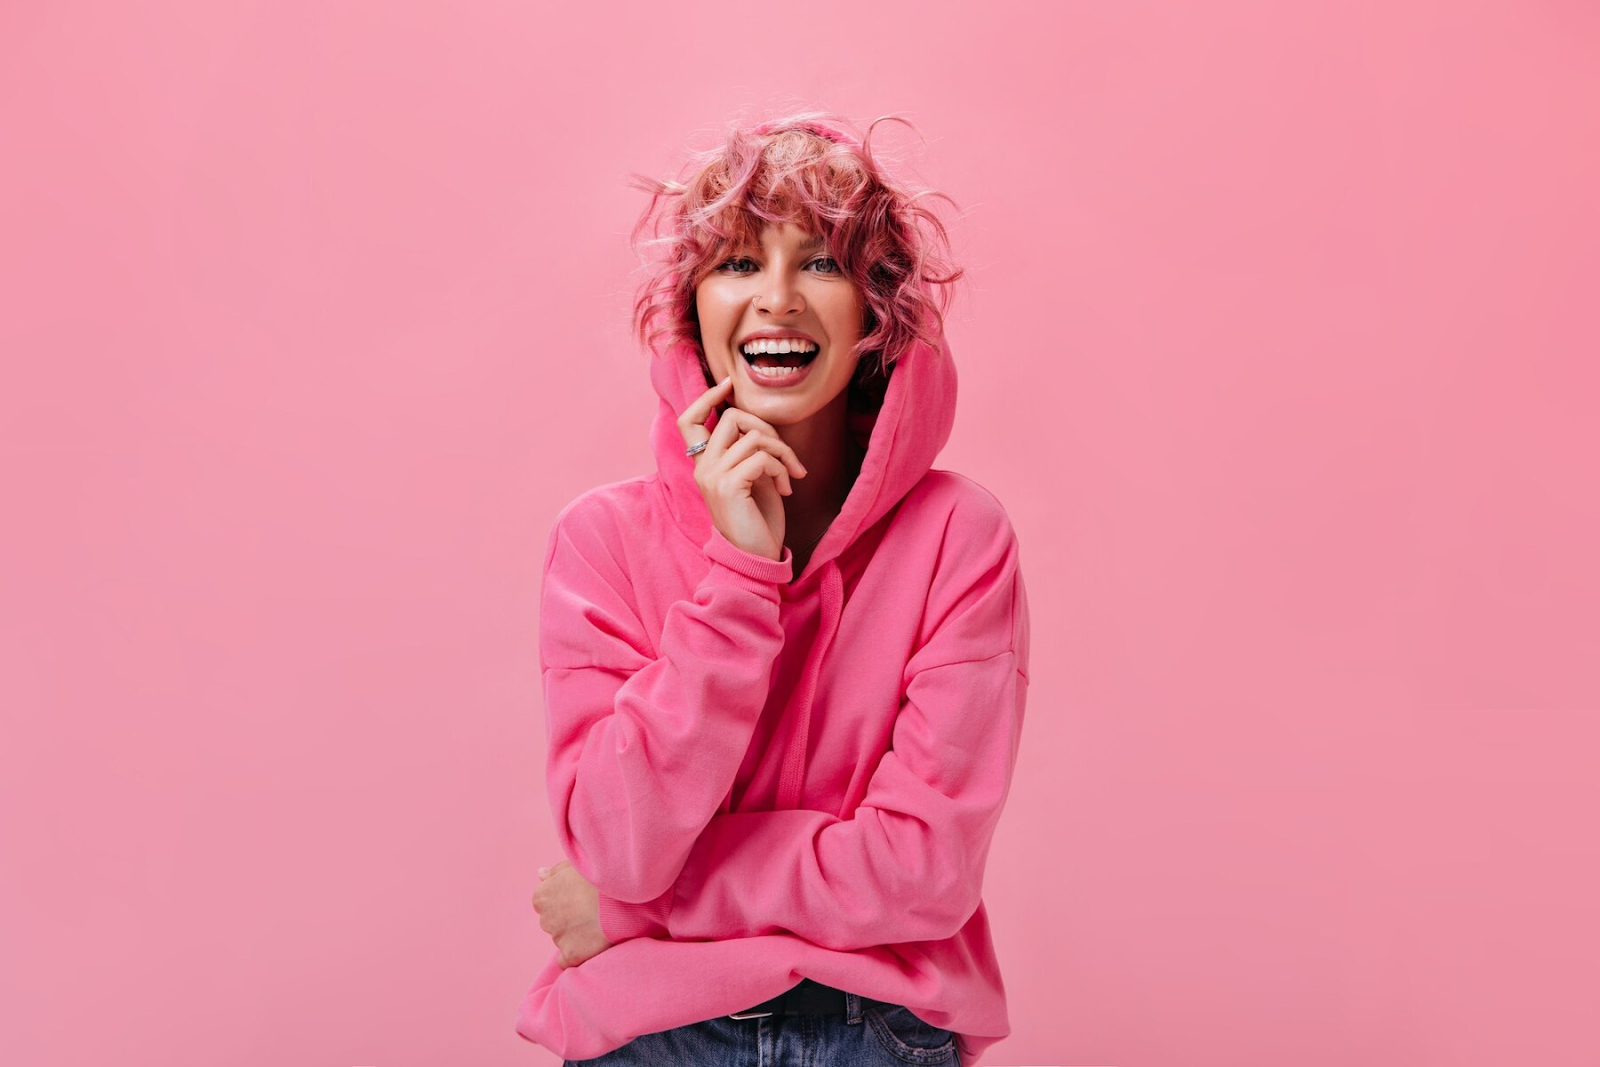 A cheerful girl with vibrant pink hair.